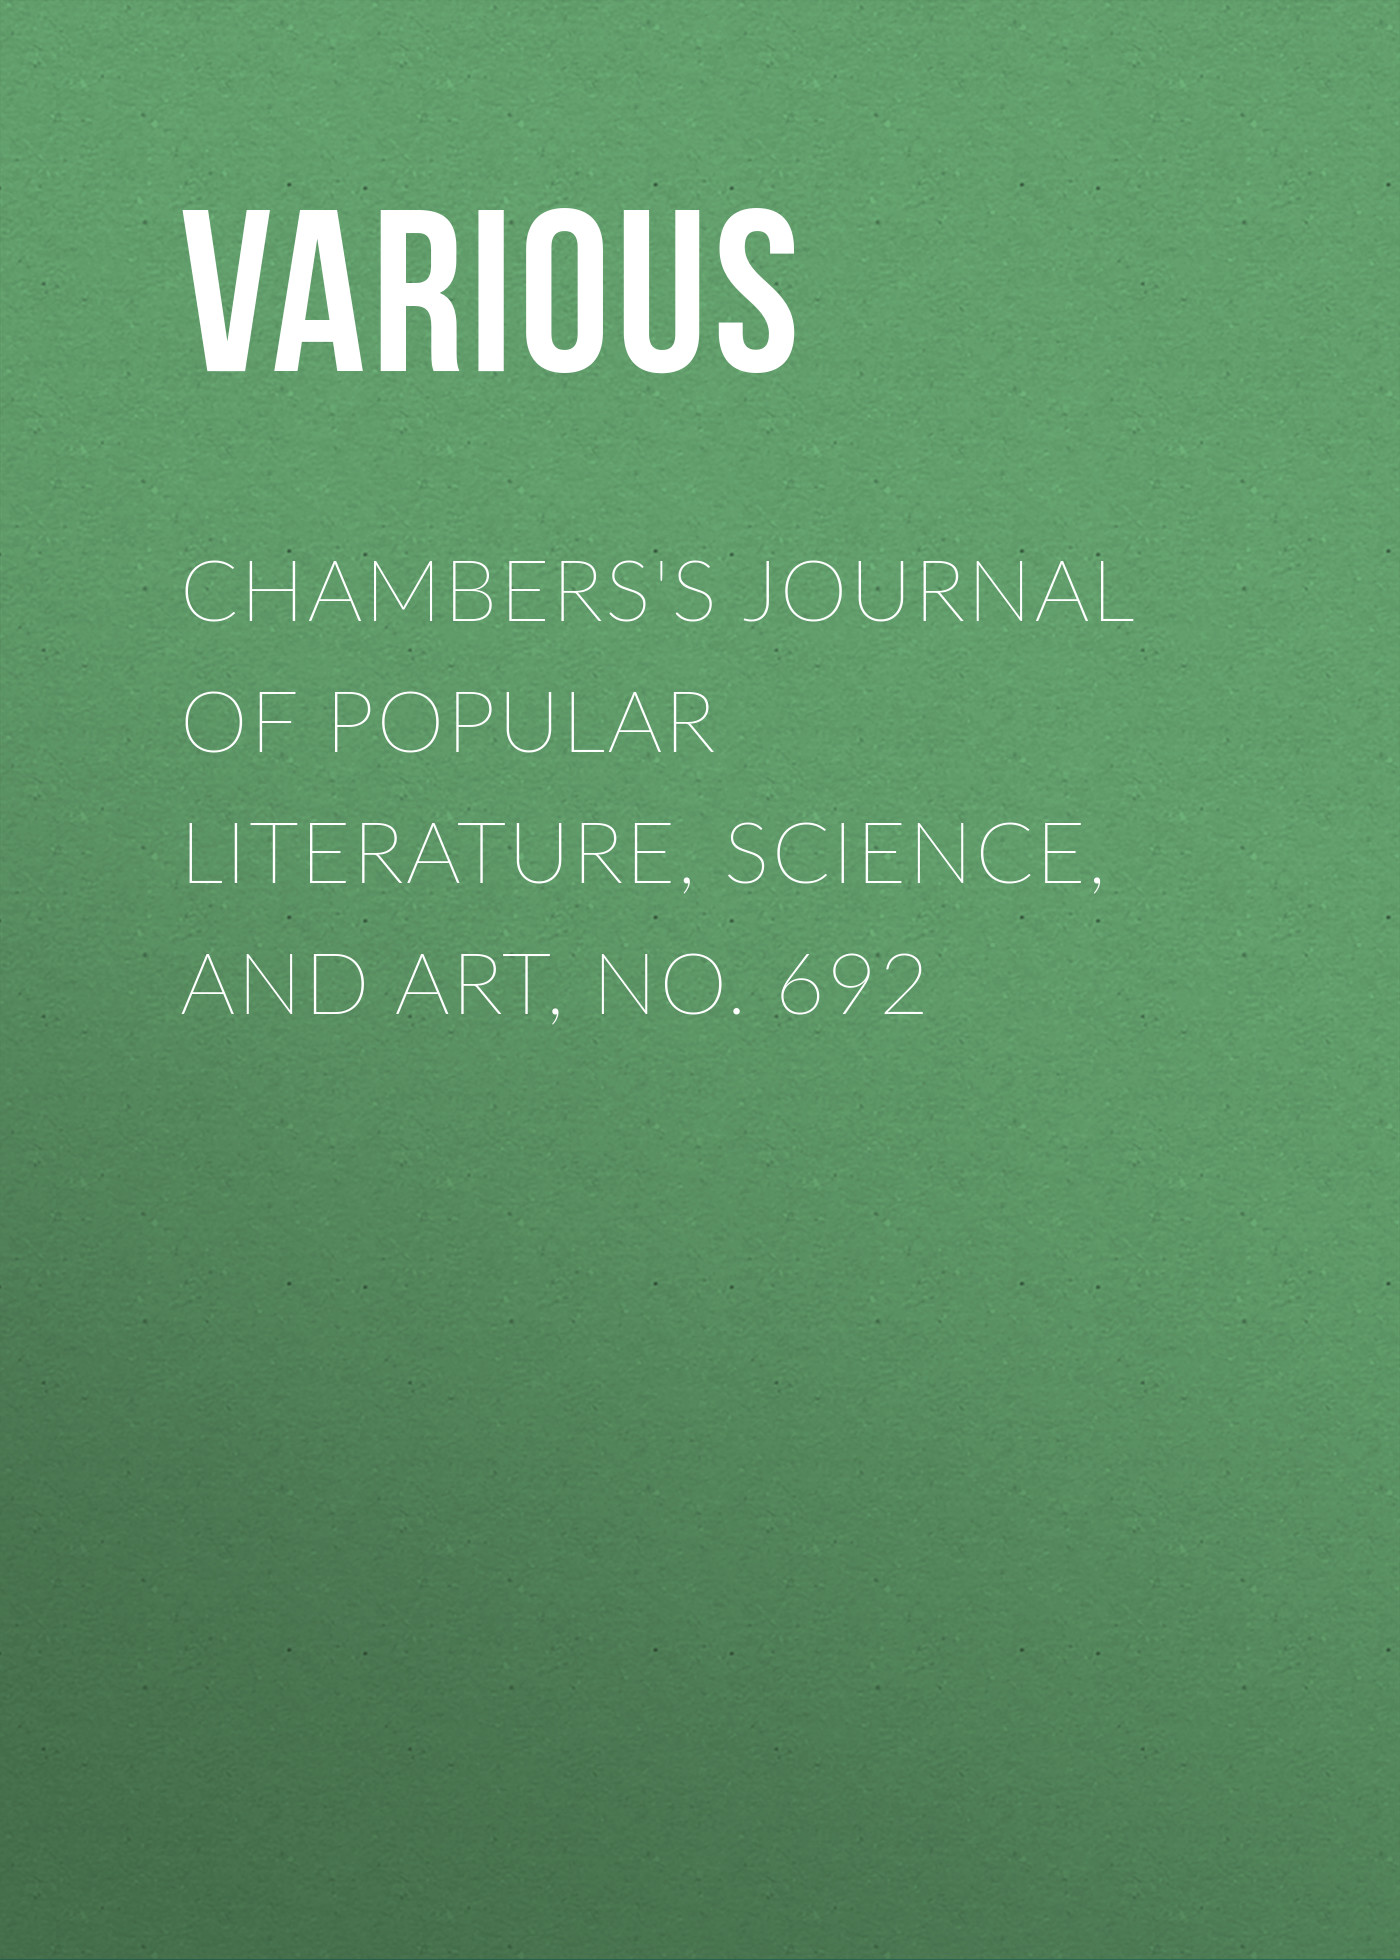 Chambers's Journal of Popular Literature, Science, and Art, No. 692